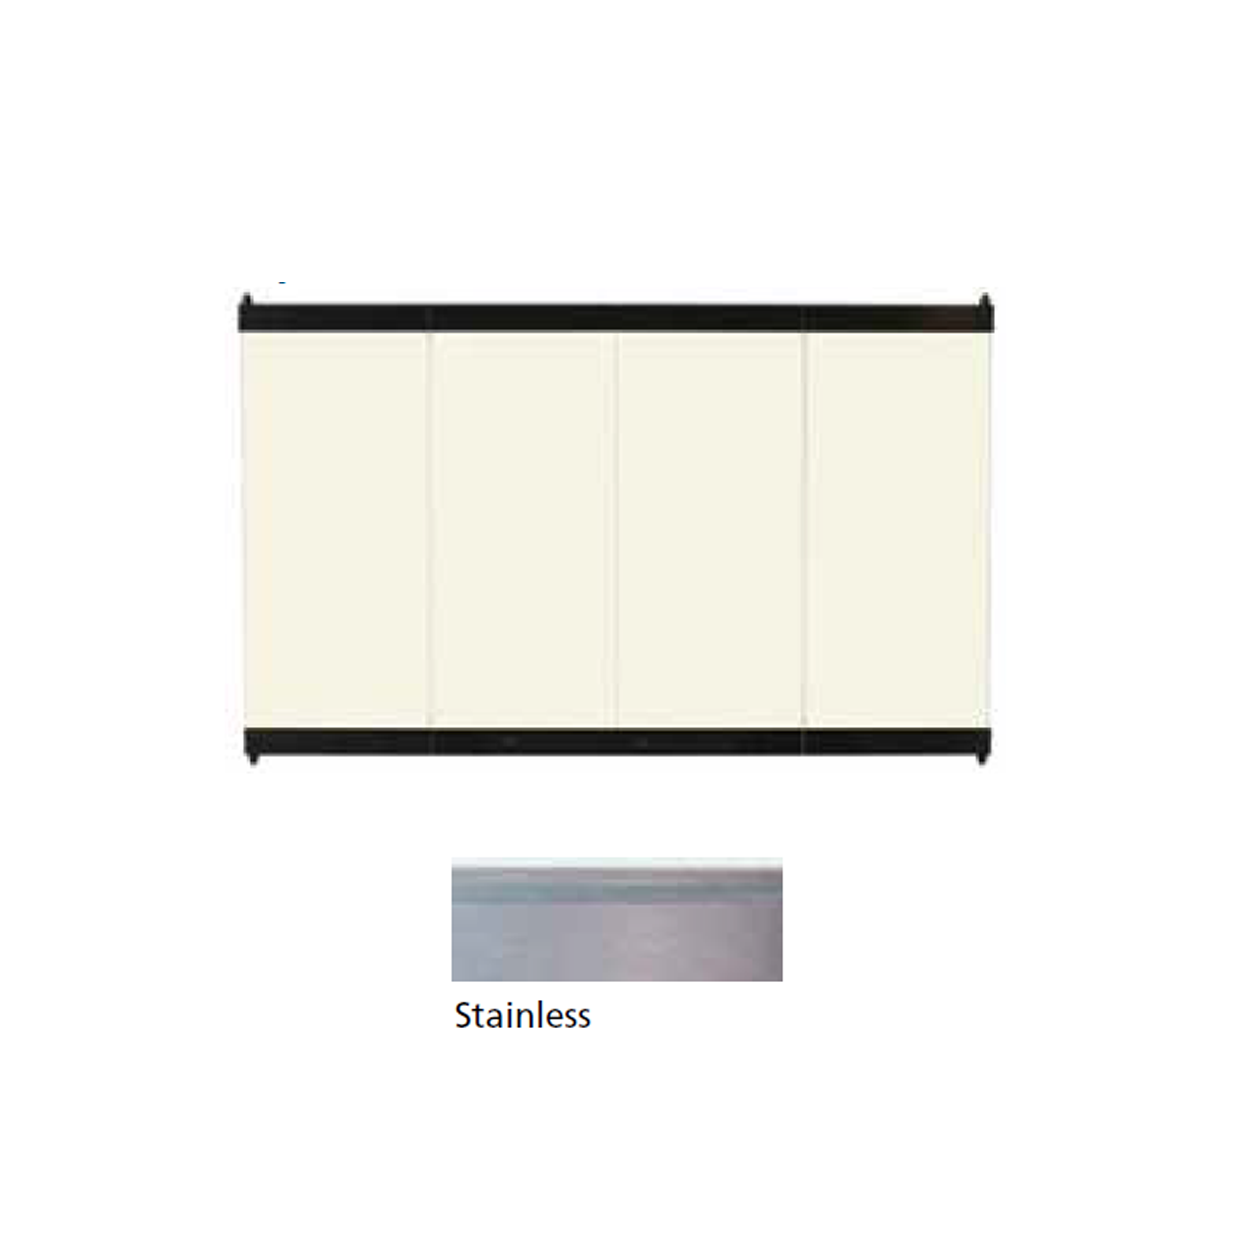 Superior Stainless on Bronze Tinted Glass Enclosure Panel | GEP-36BS